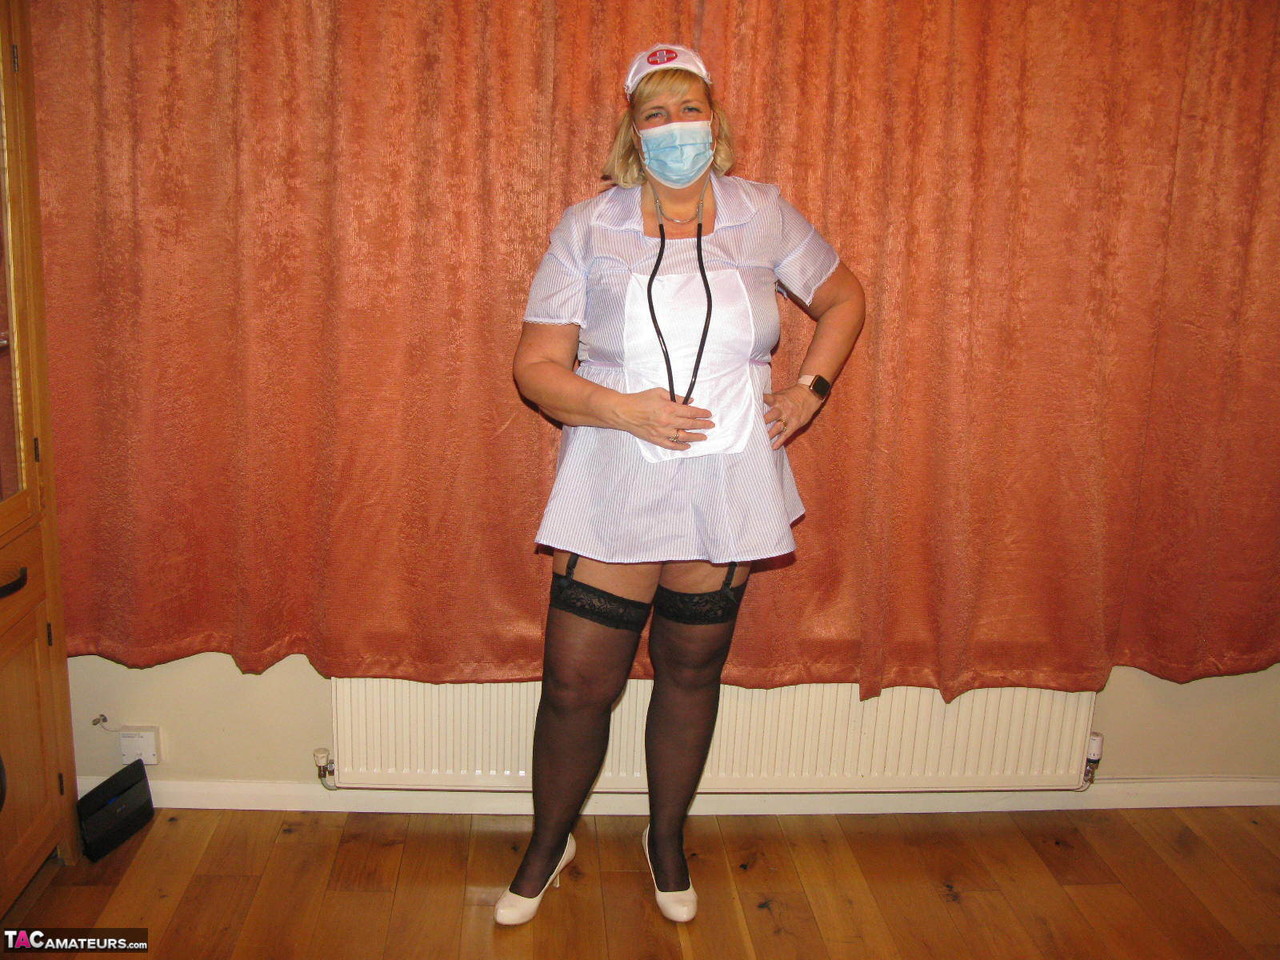 Fat nurse Chrissy Uk removes a surgical mask and uniform to model lingerie foto porno #424682137